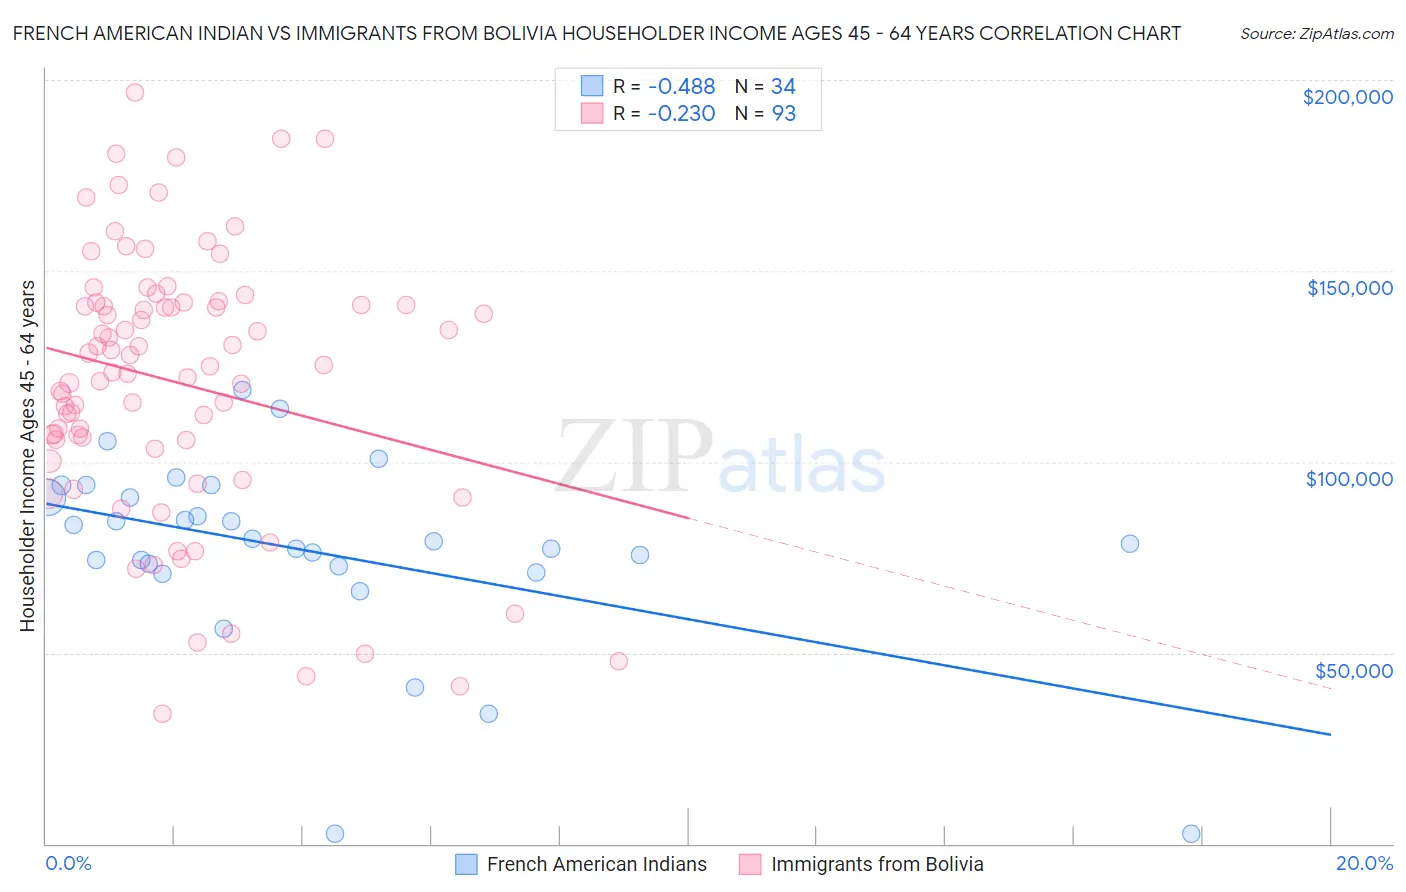 French American Indian vs Immigrants from Bolivia Householder Income Ages 45 - 64 years